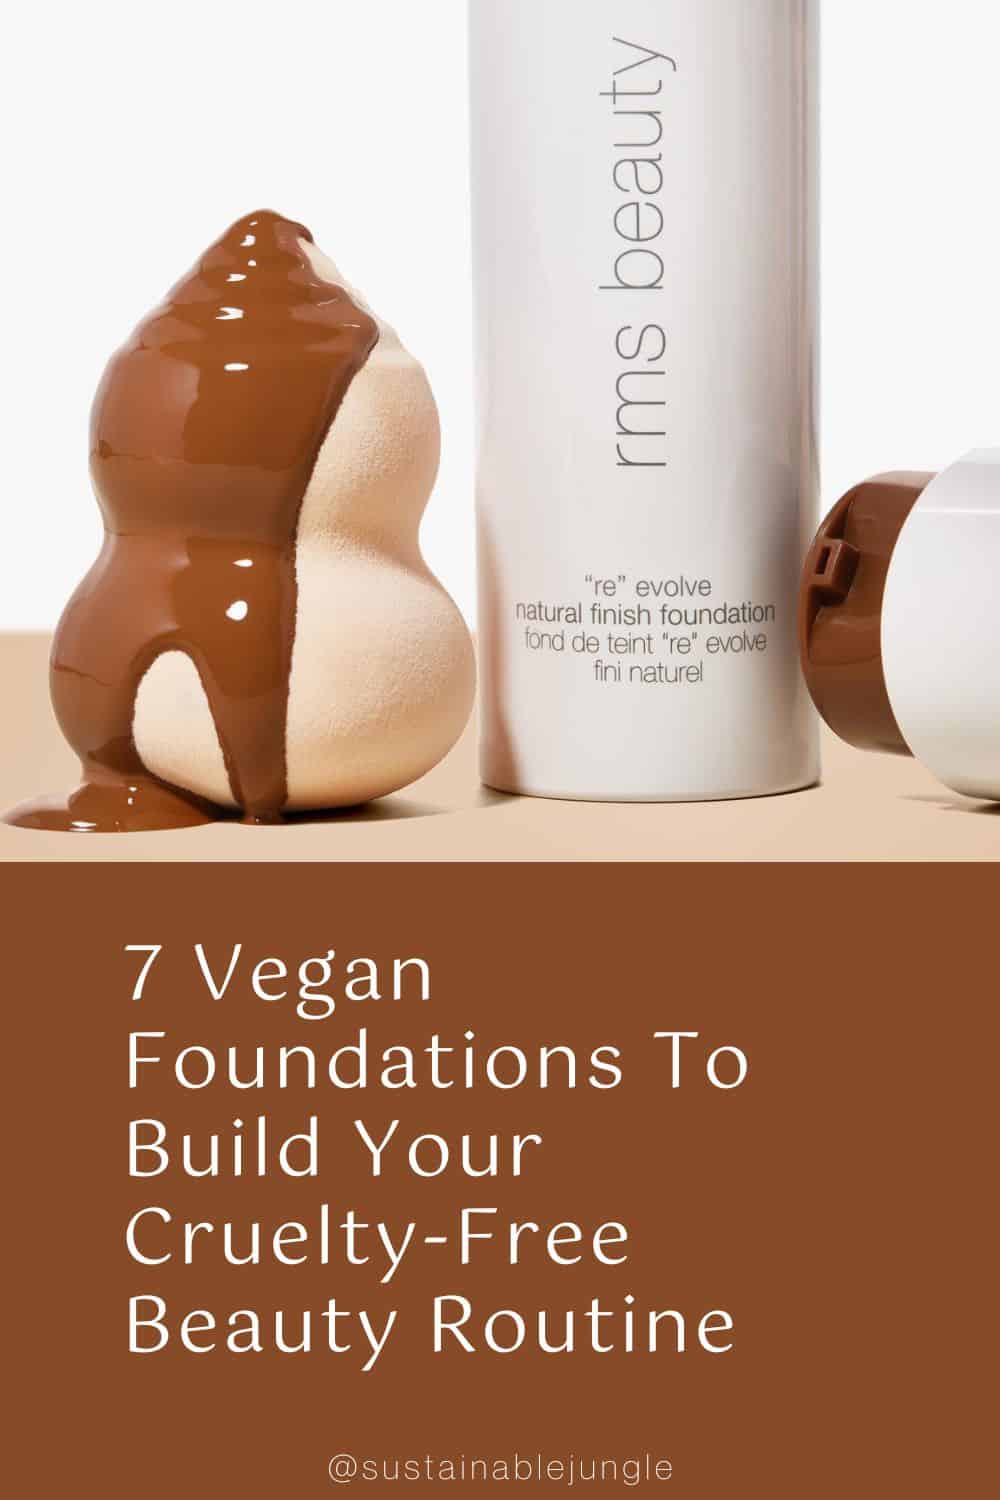 7 Vegan Foundations To Build Your Cruelty-Free Beauty Routine Image by RMS Beauty #veganfoundation #bestveganfoundations #veganfoundationmakeup #crueltyfreefoundation #crueltyfreefoundationfordryskin #crueltyfreefullcoveragefoundation #sustainablejungle